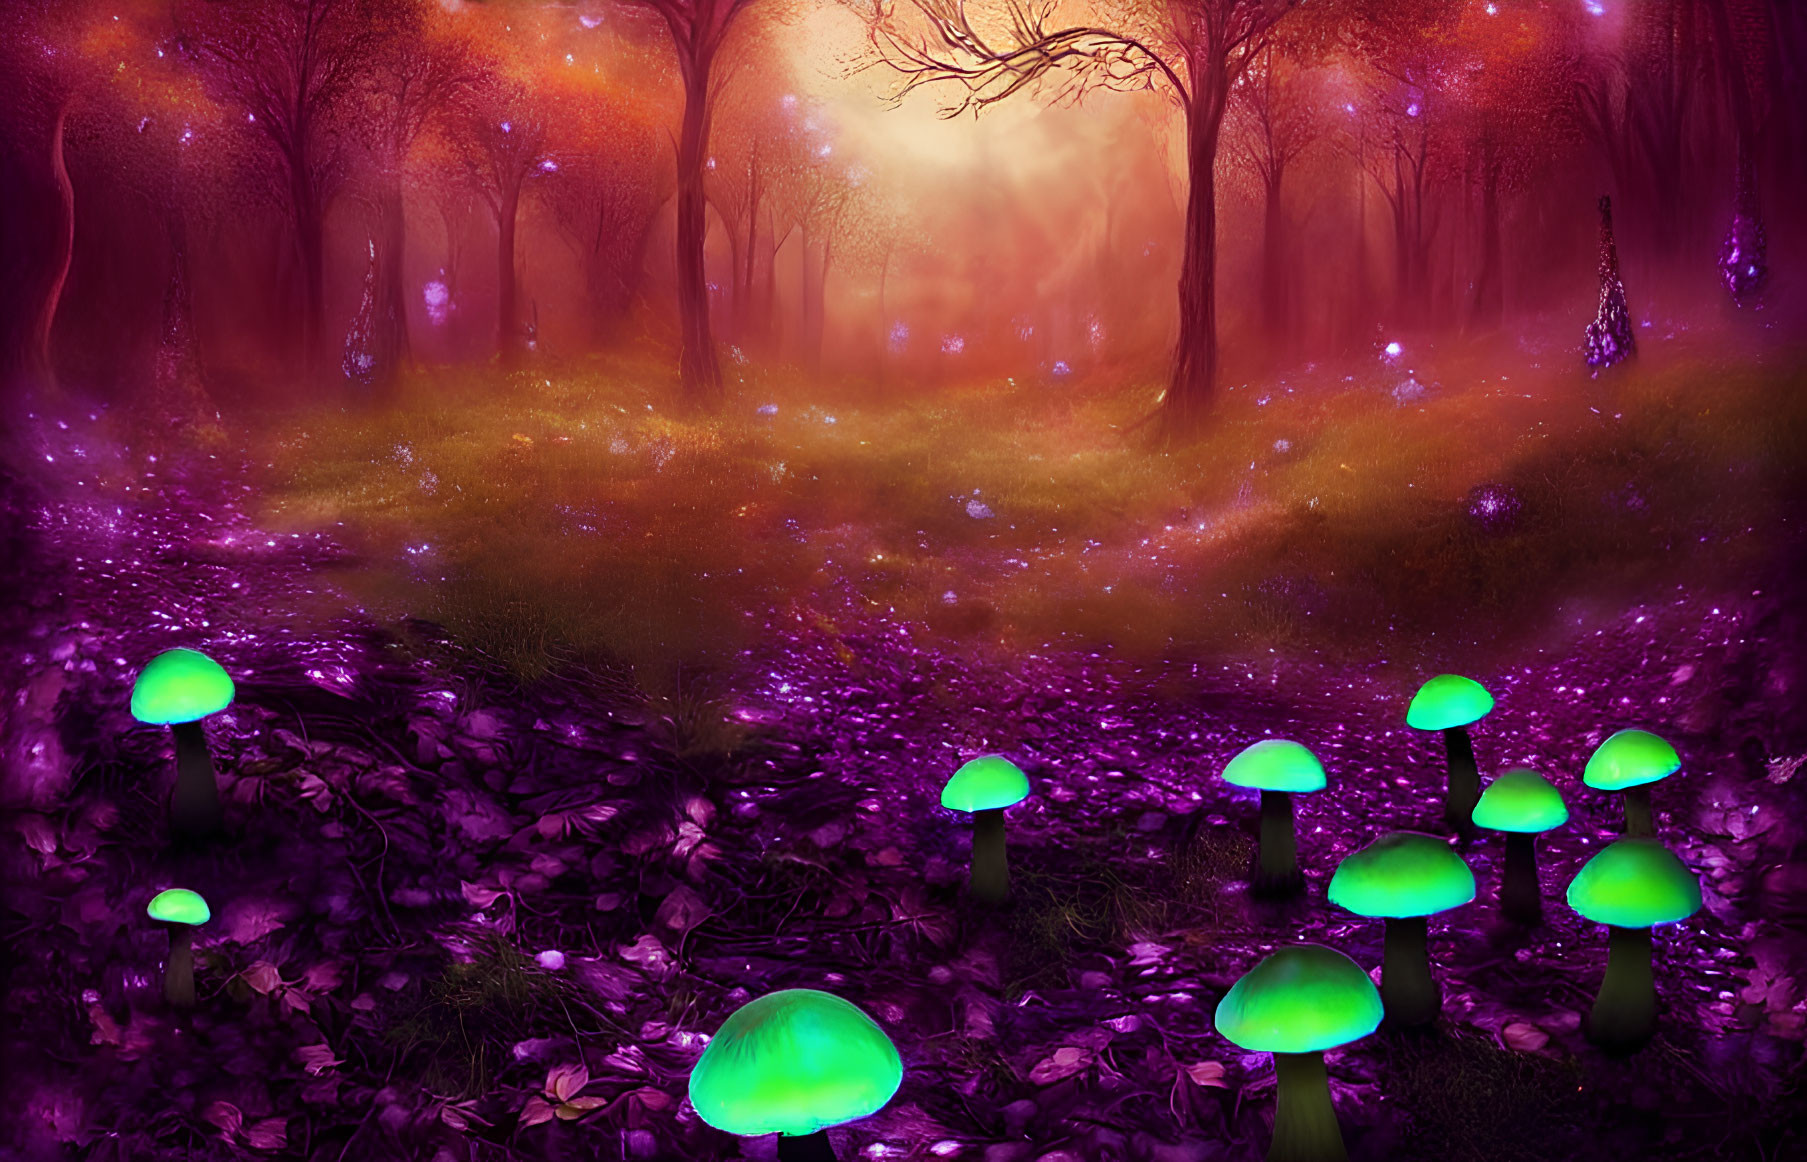 Enchanting purple forest with glowing mushrooms and sunset fog